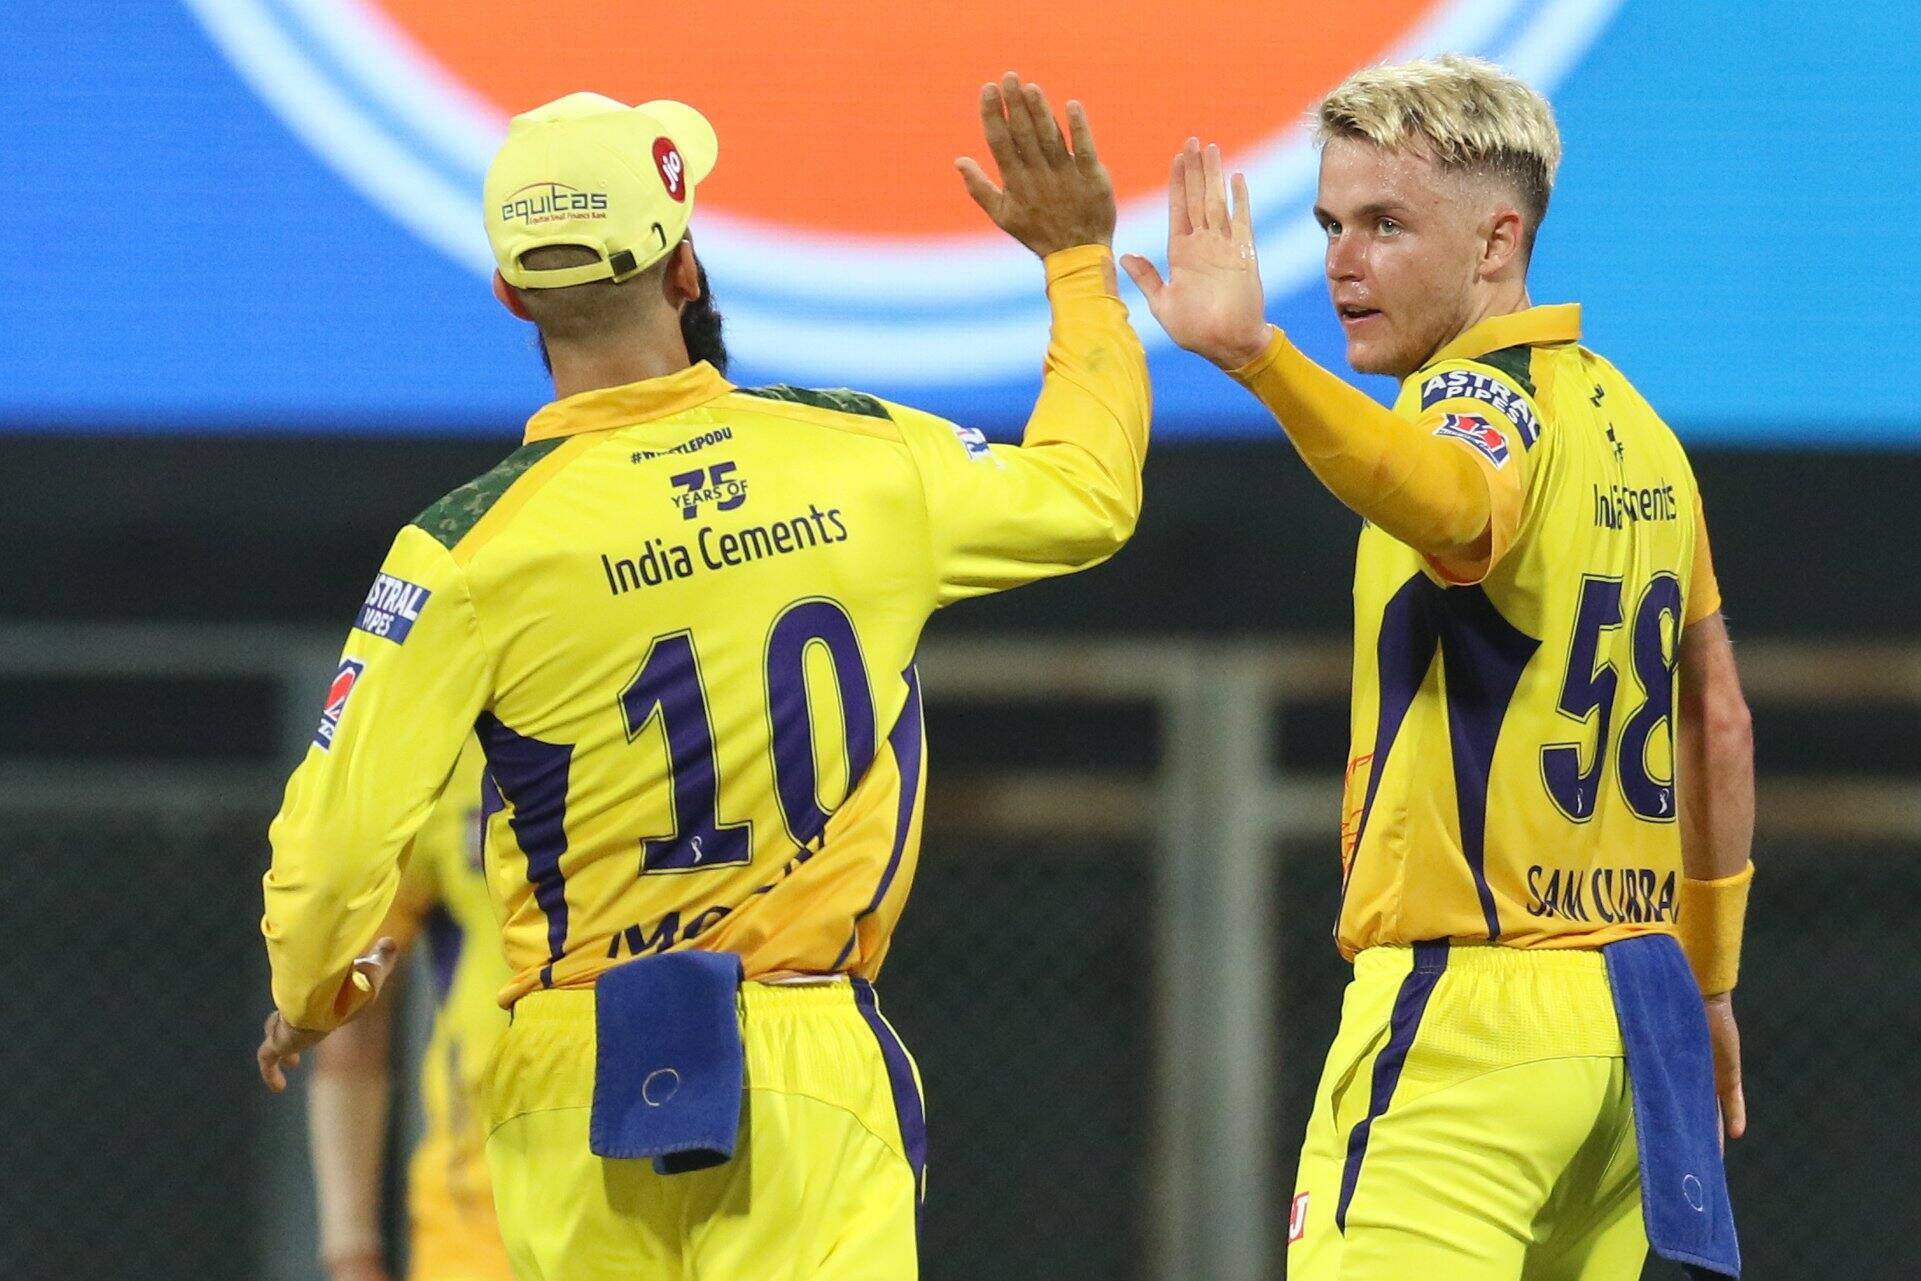 CSK all-rounder Sam Curran celebrates after taking a wicket against Rajasthan Royals in their IPL 2021 in Mumbai. (Photo: IPL)